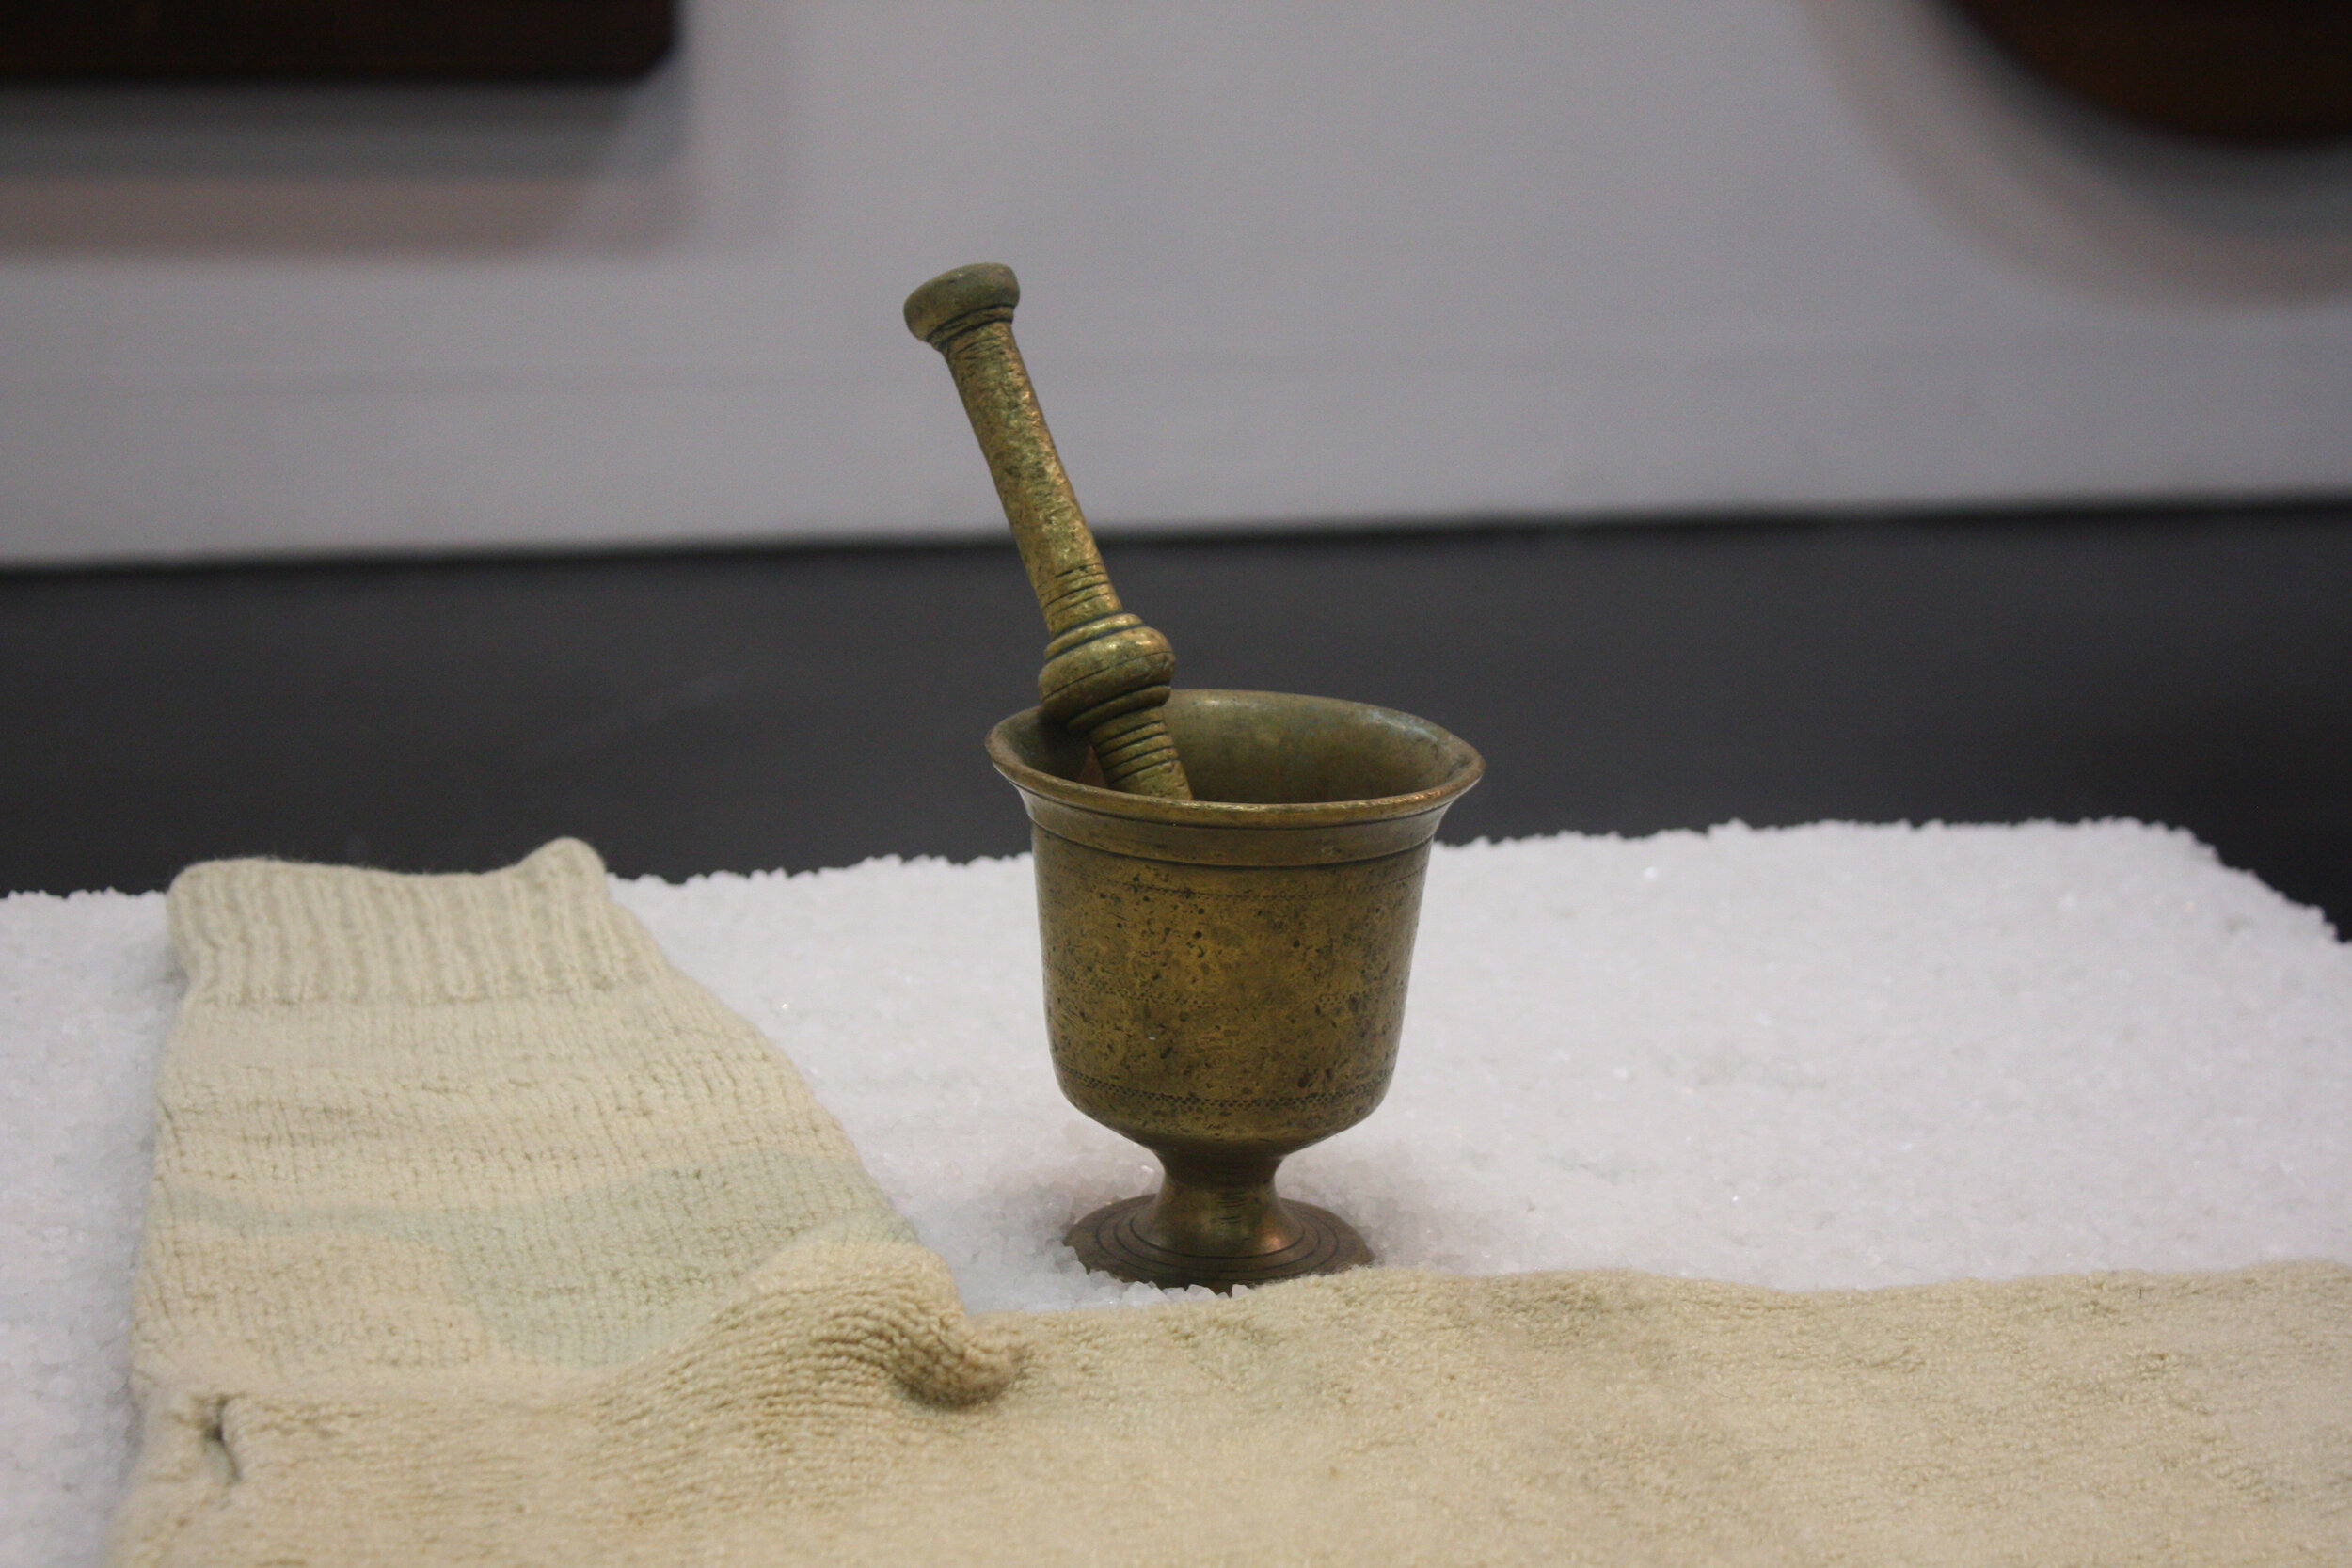    My sister’s table, my father’s garment, my mother’s mortar and pestle     (detail), 2013  Material: wooden table, granular salt, woolen handknitted garment, brass mortar and pestle. Presence: artist’s mother, father, sister, islands. 